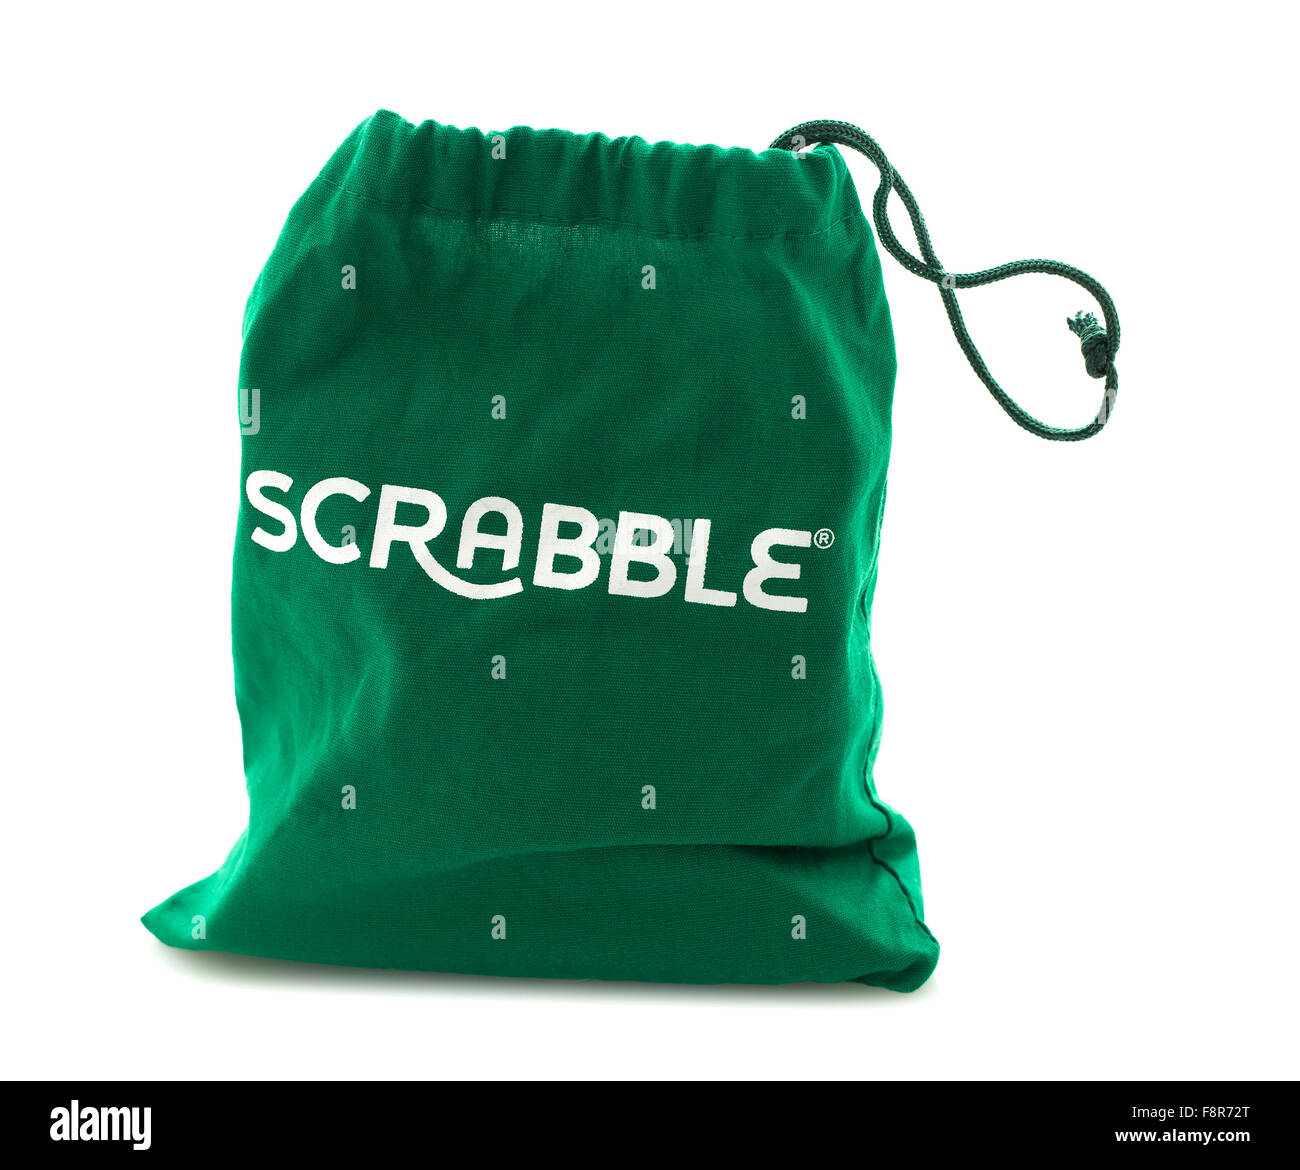 Scrabble Tile Bag from the Word Game on a White Background Stock Photo